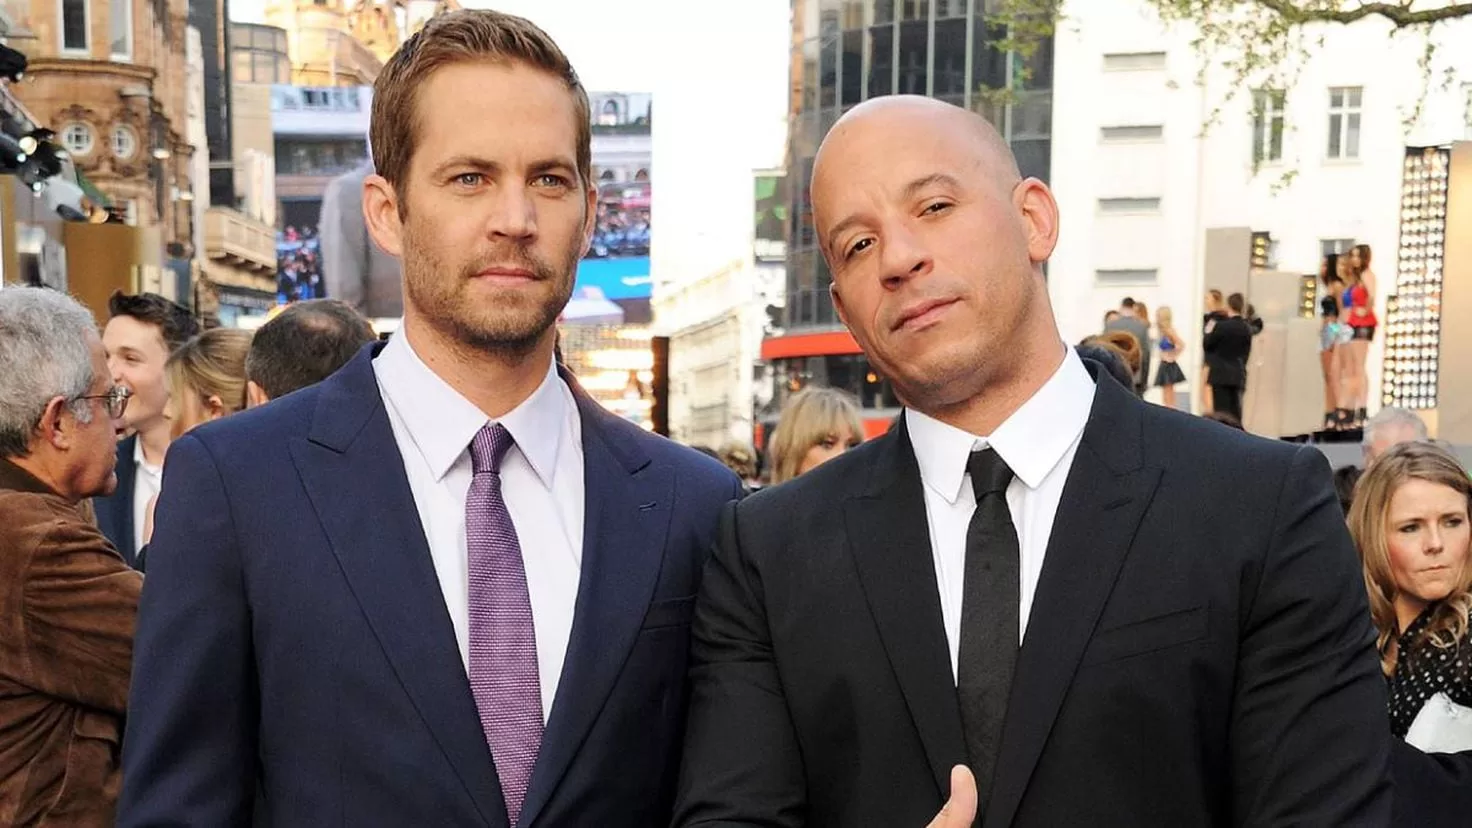 The gesture of the Fast & Furious actors with Paul Walker's family after his death
